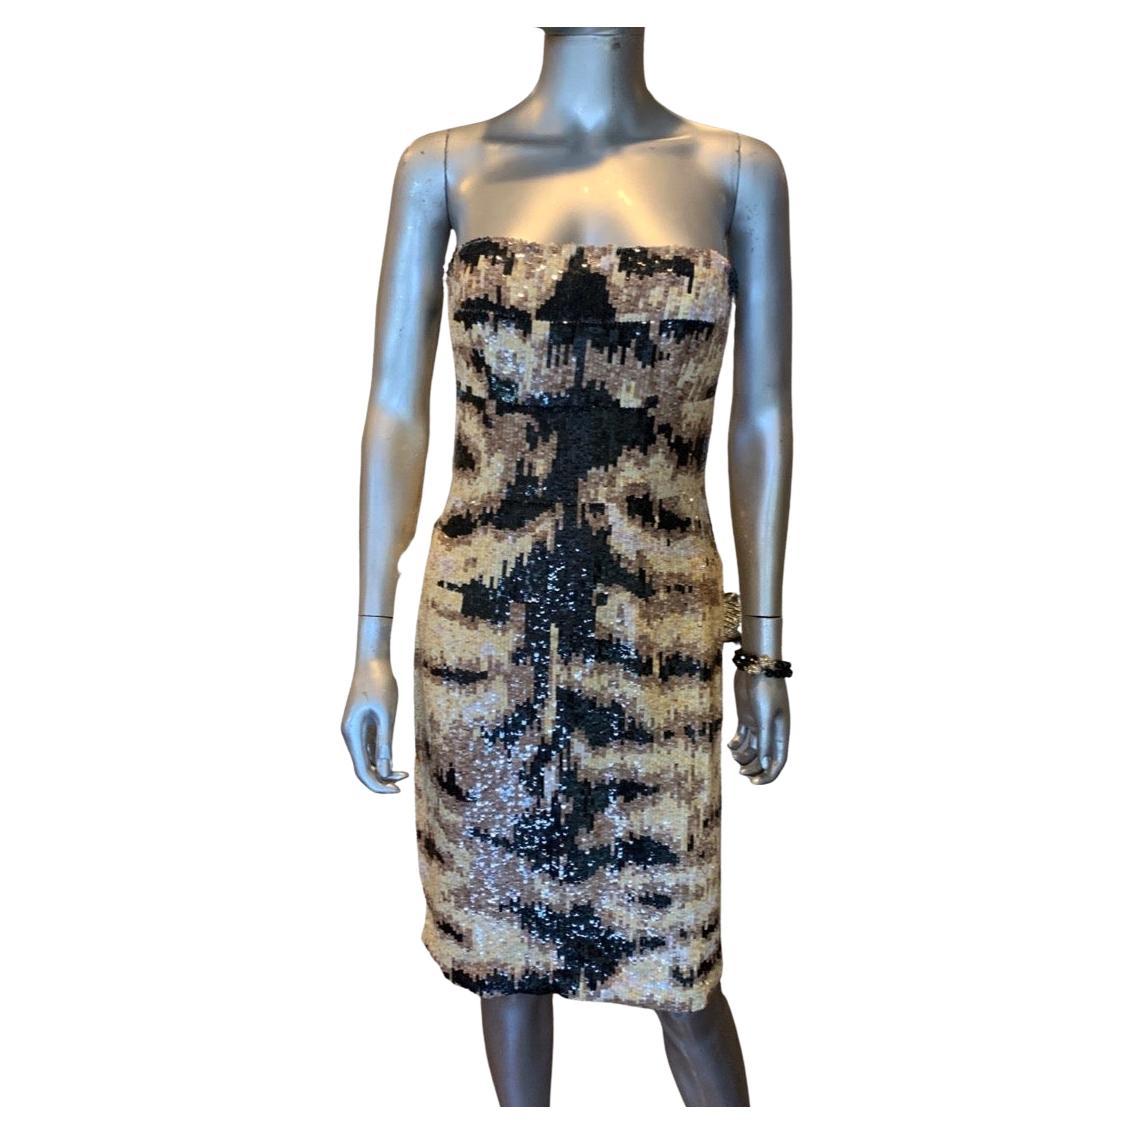 Kaufmanfranco NWT Rare Tiger Sequins Hand Beaded Sleevless Cocktail Dress Size 4 For Sale